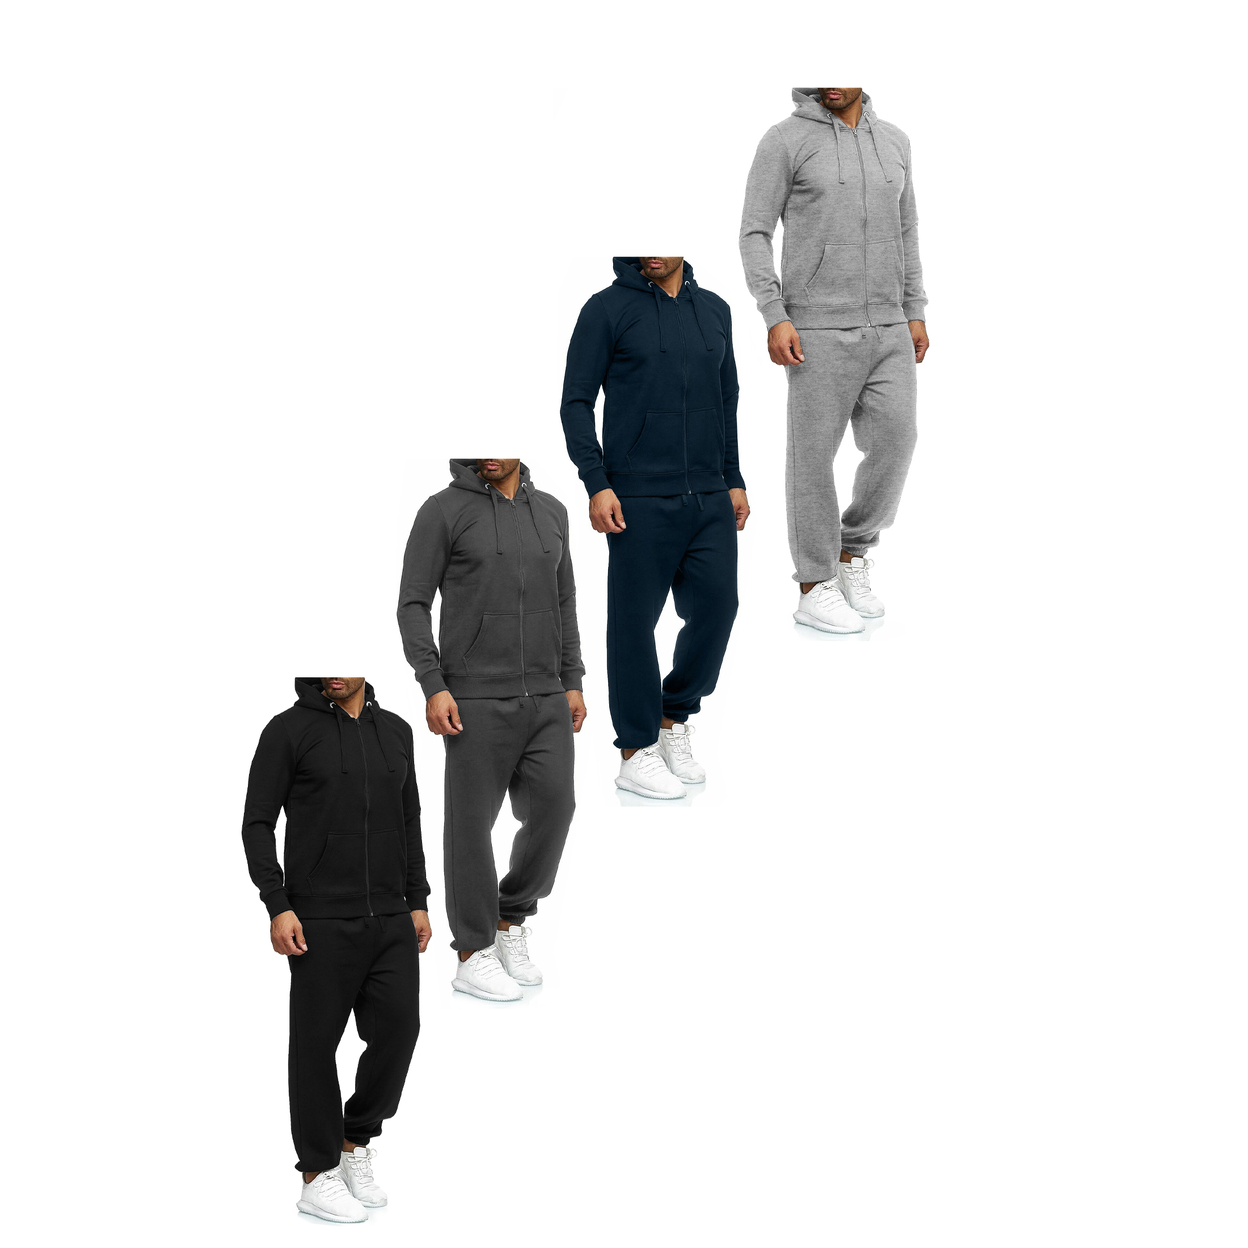 2-Pack: Men's Casual Big & Tall Athletic Active Winter Warm Fleece Lined Full Zip Tracksuit Jogger Set - Navy, Large